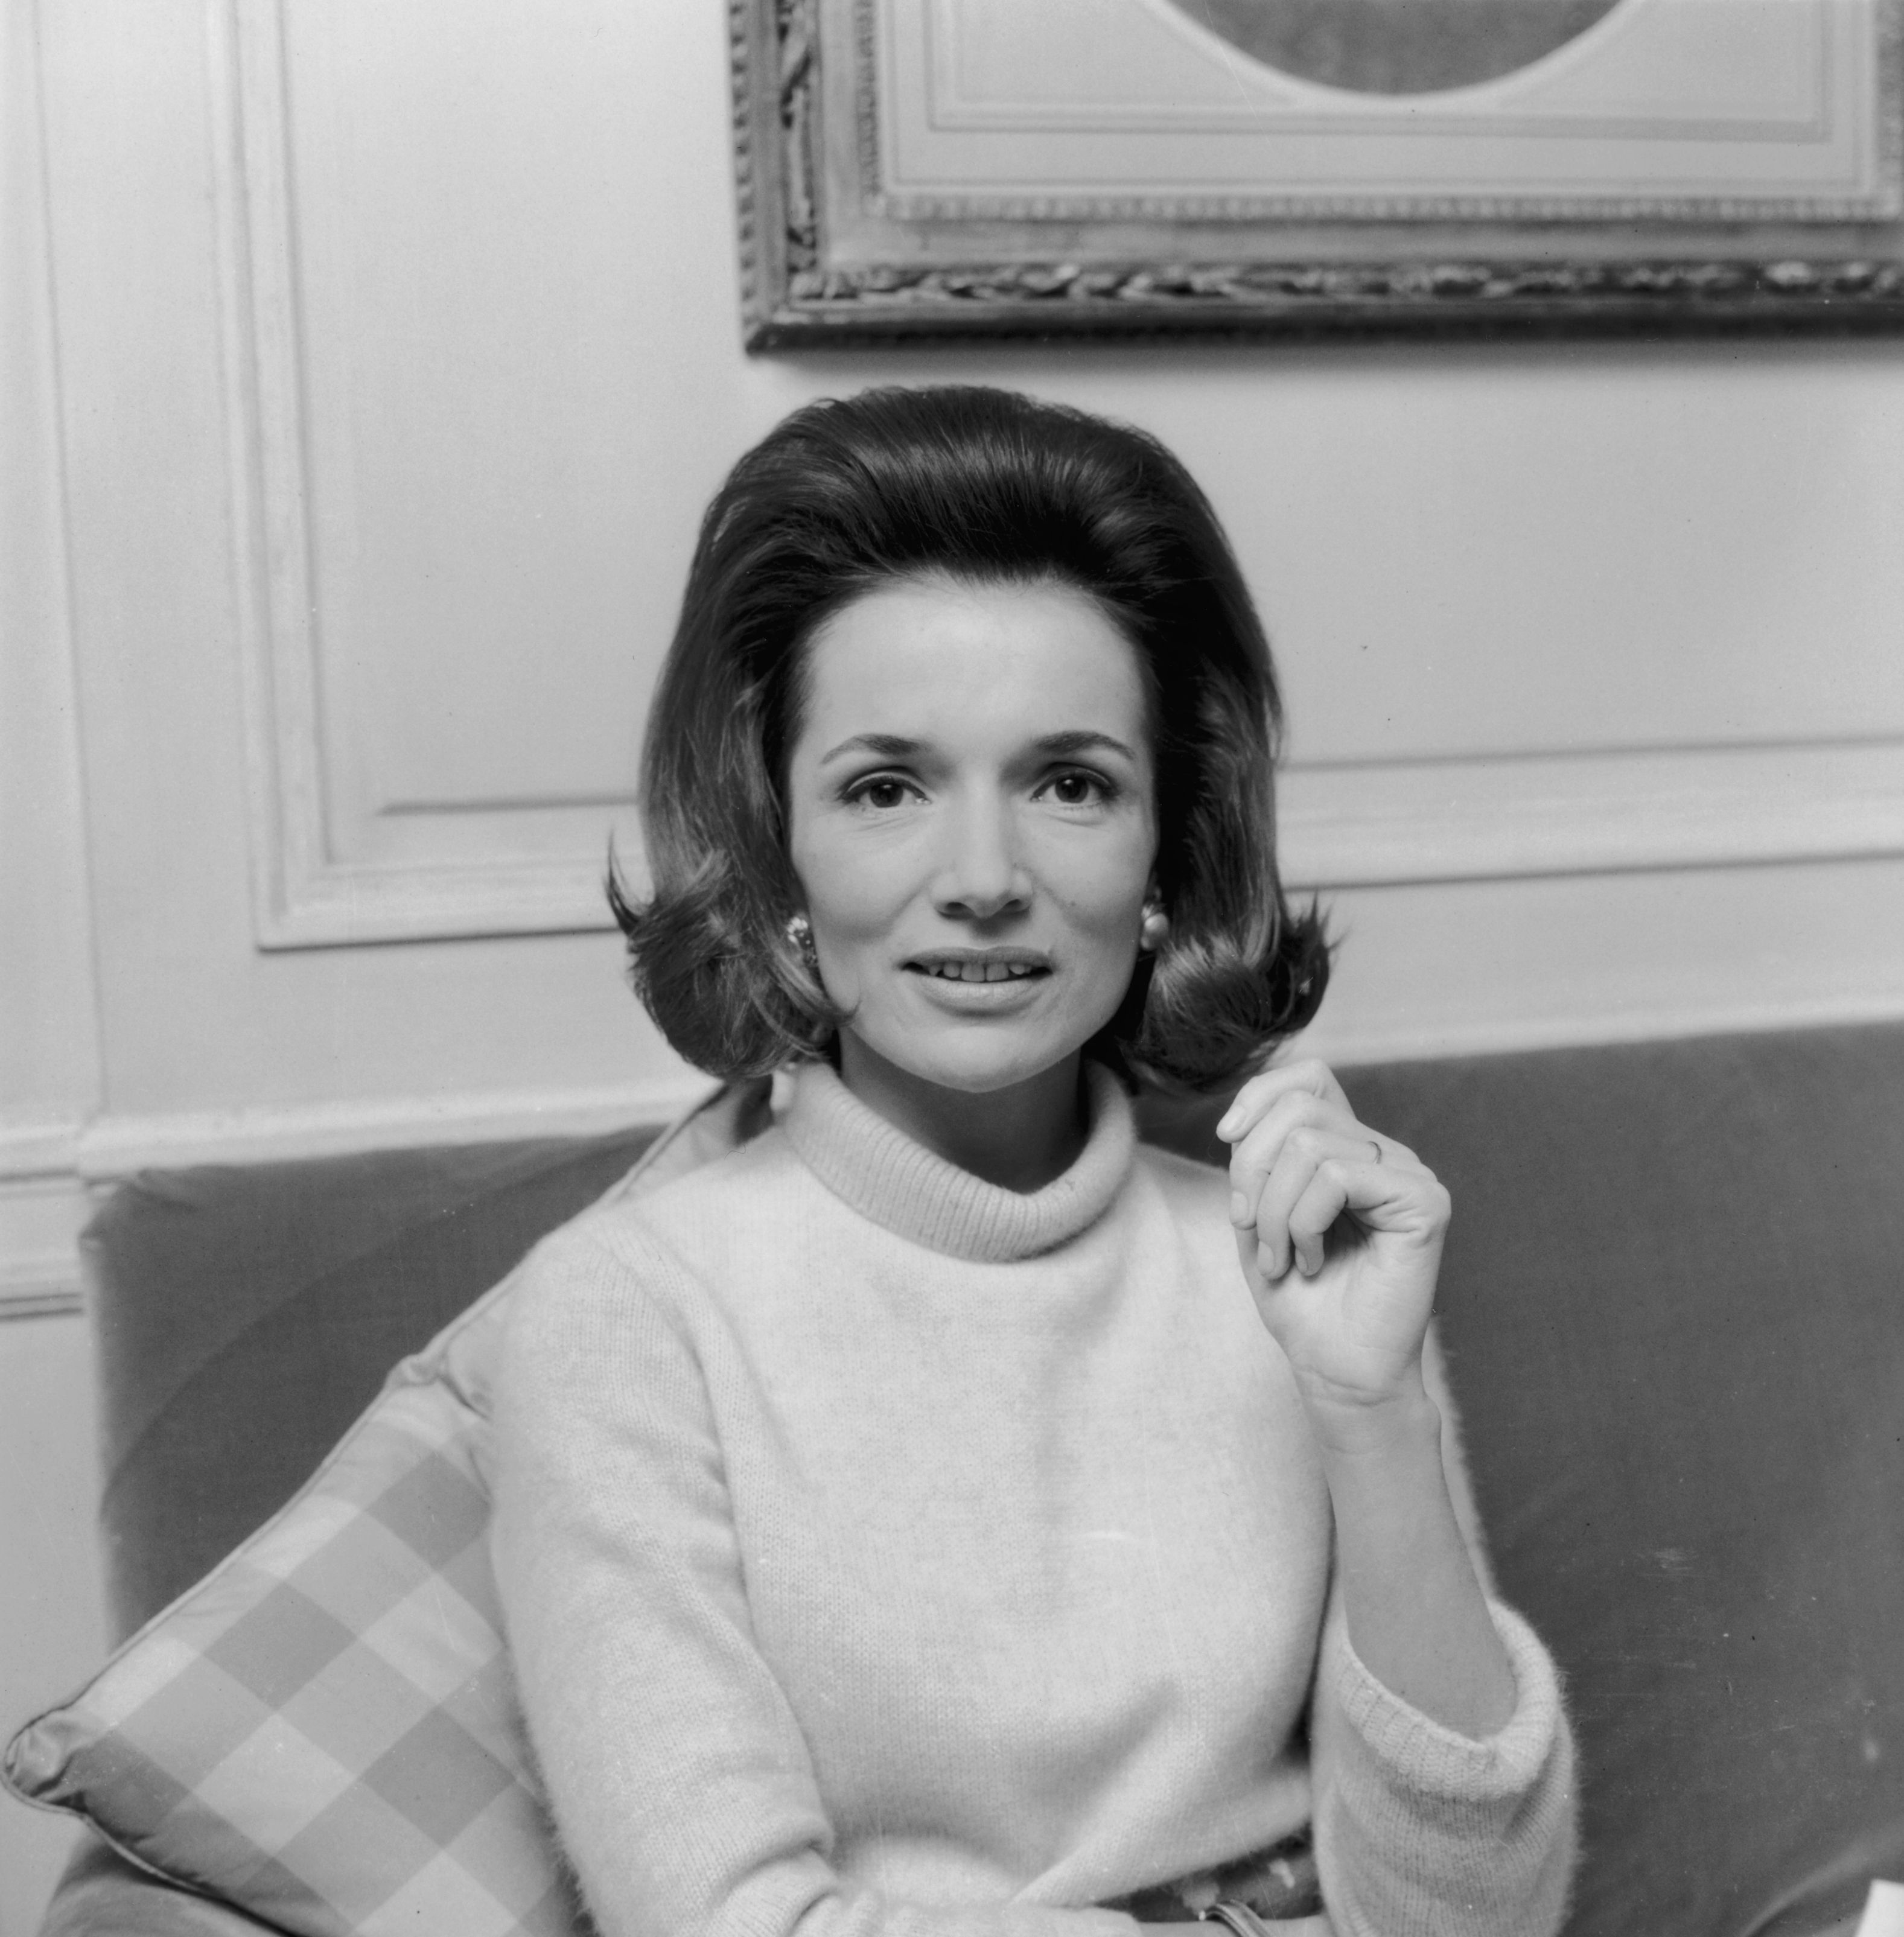 Lee Radziwill, Jackie Kennedy's sister and fashion icon, dies aged 85